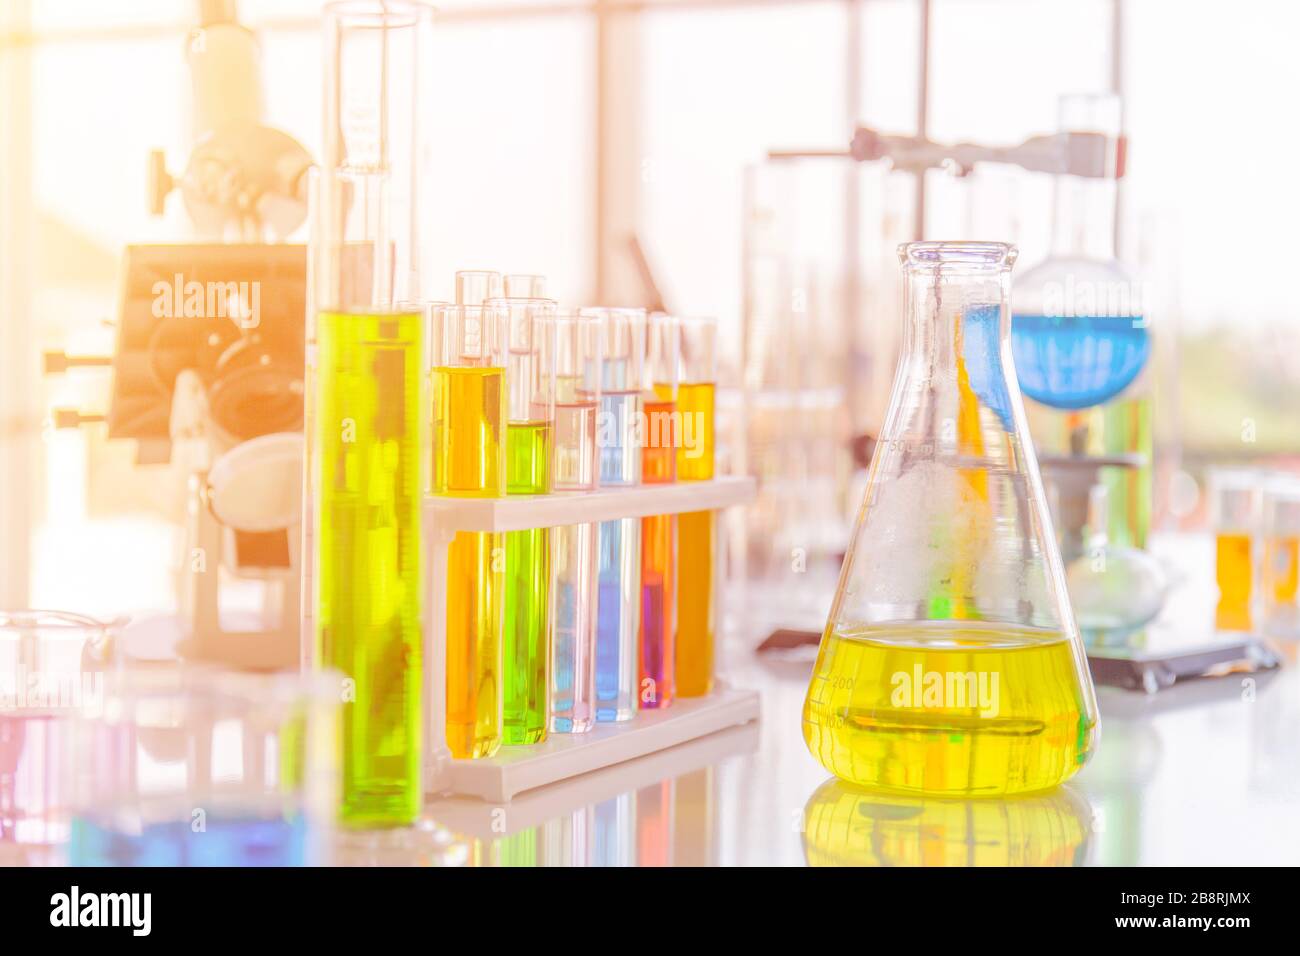 Chemical reagent bottles in scientific experiments of various sizes Stock Photo